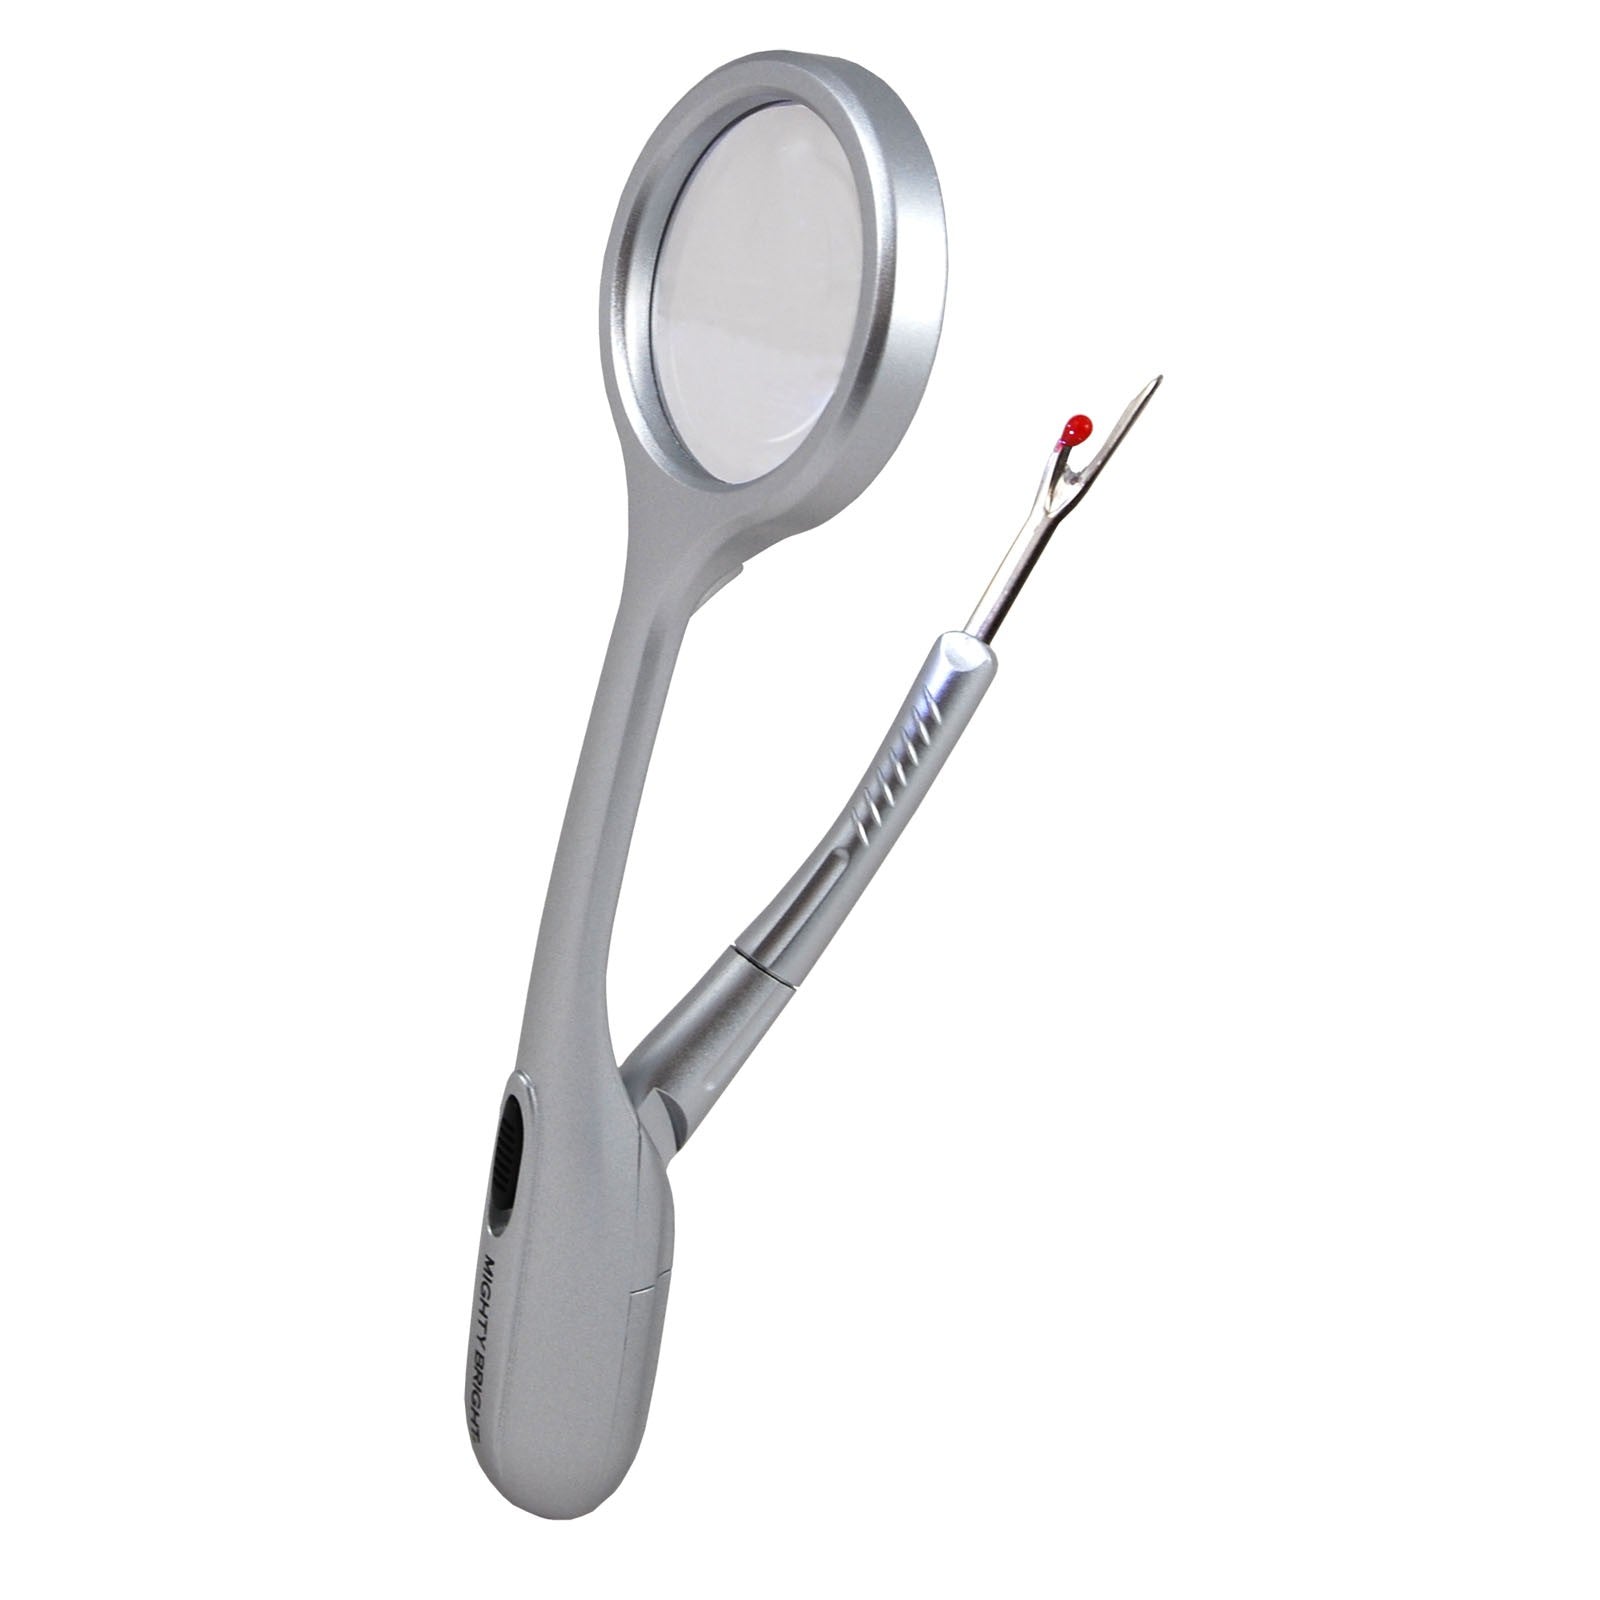 Mighty Bright - LED Lighted Seam Ripper with Magnifier